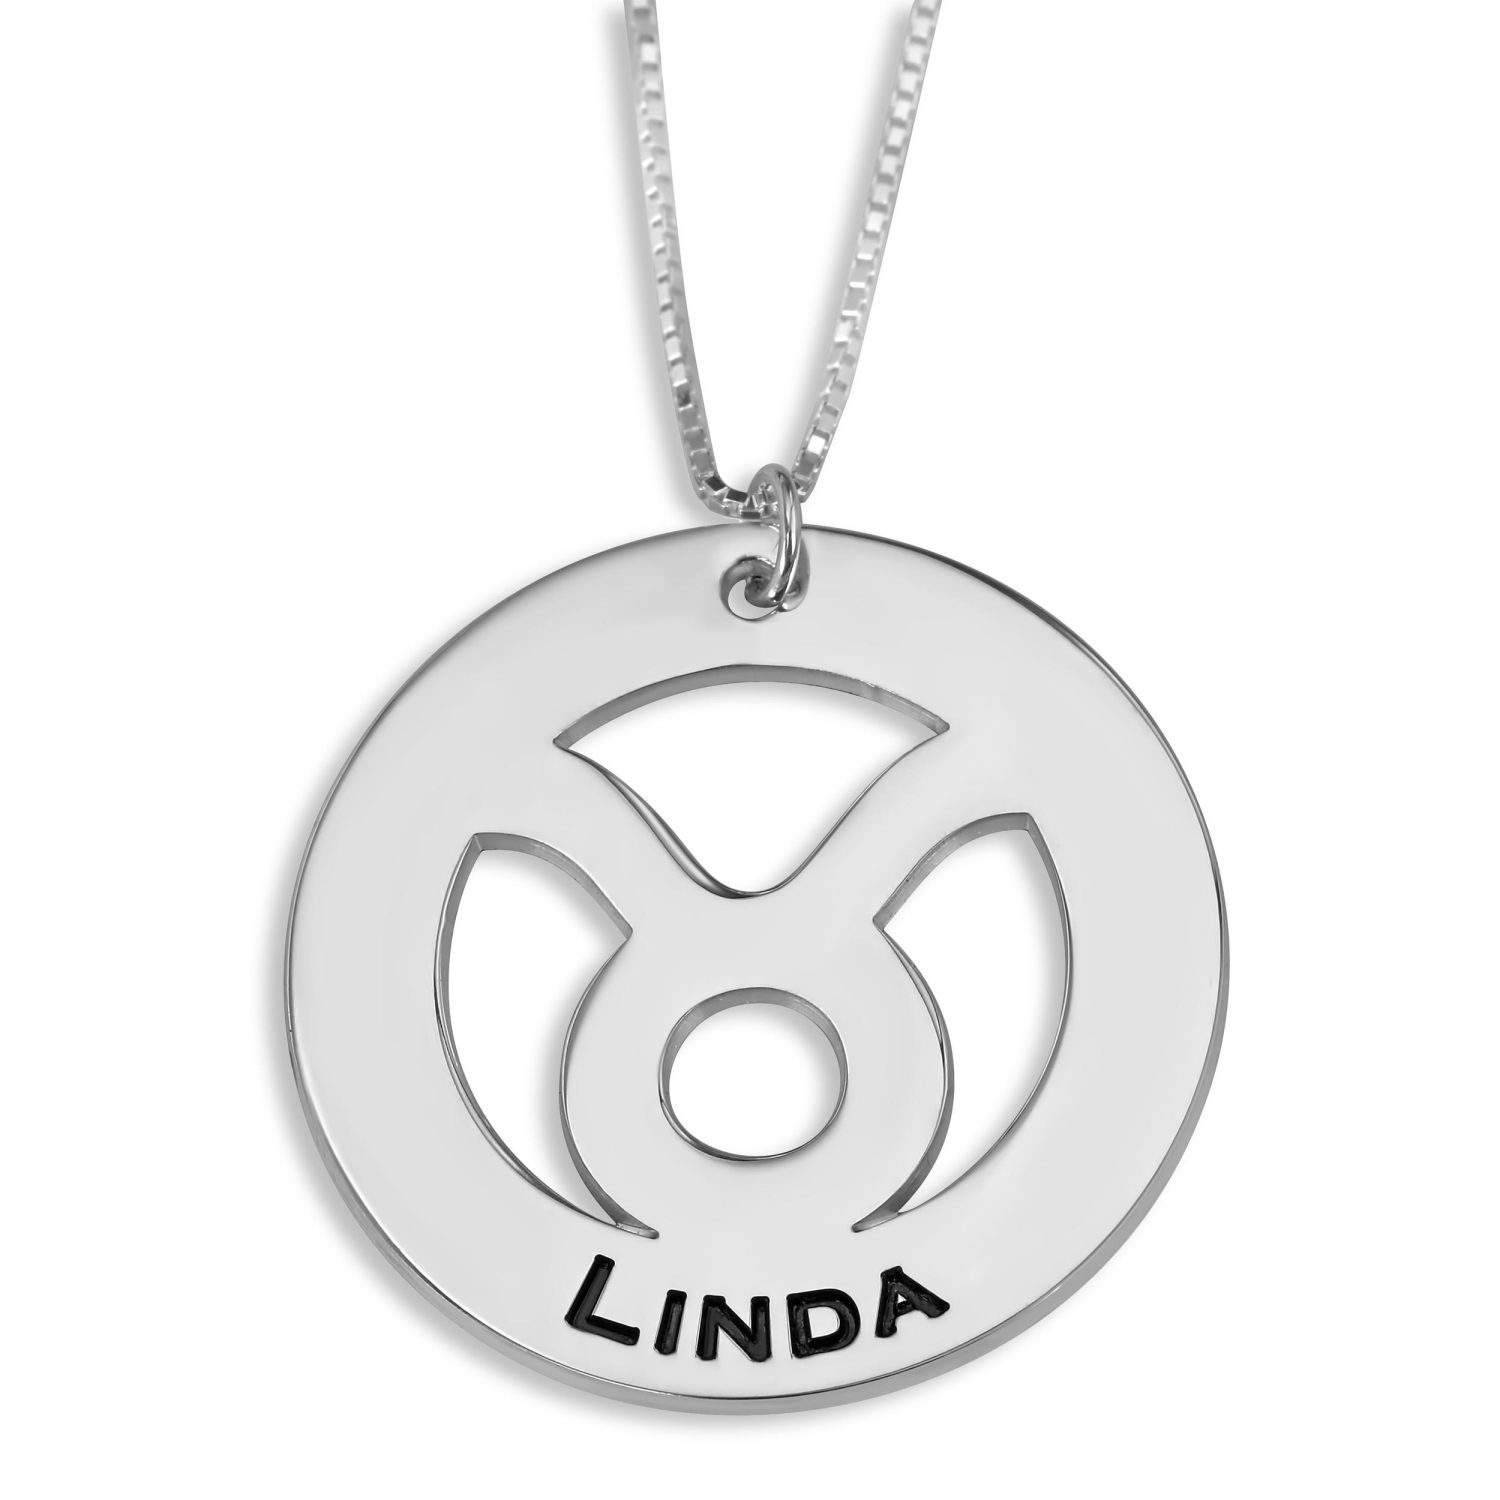 Taurus Sign Name Necklace, Sterling Silver - 1